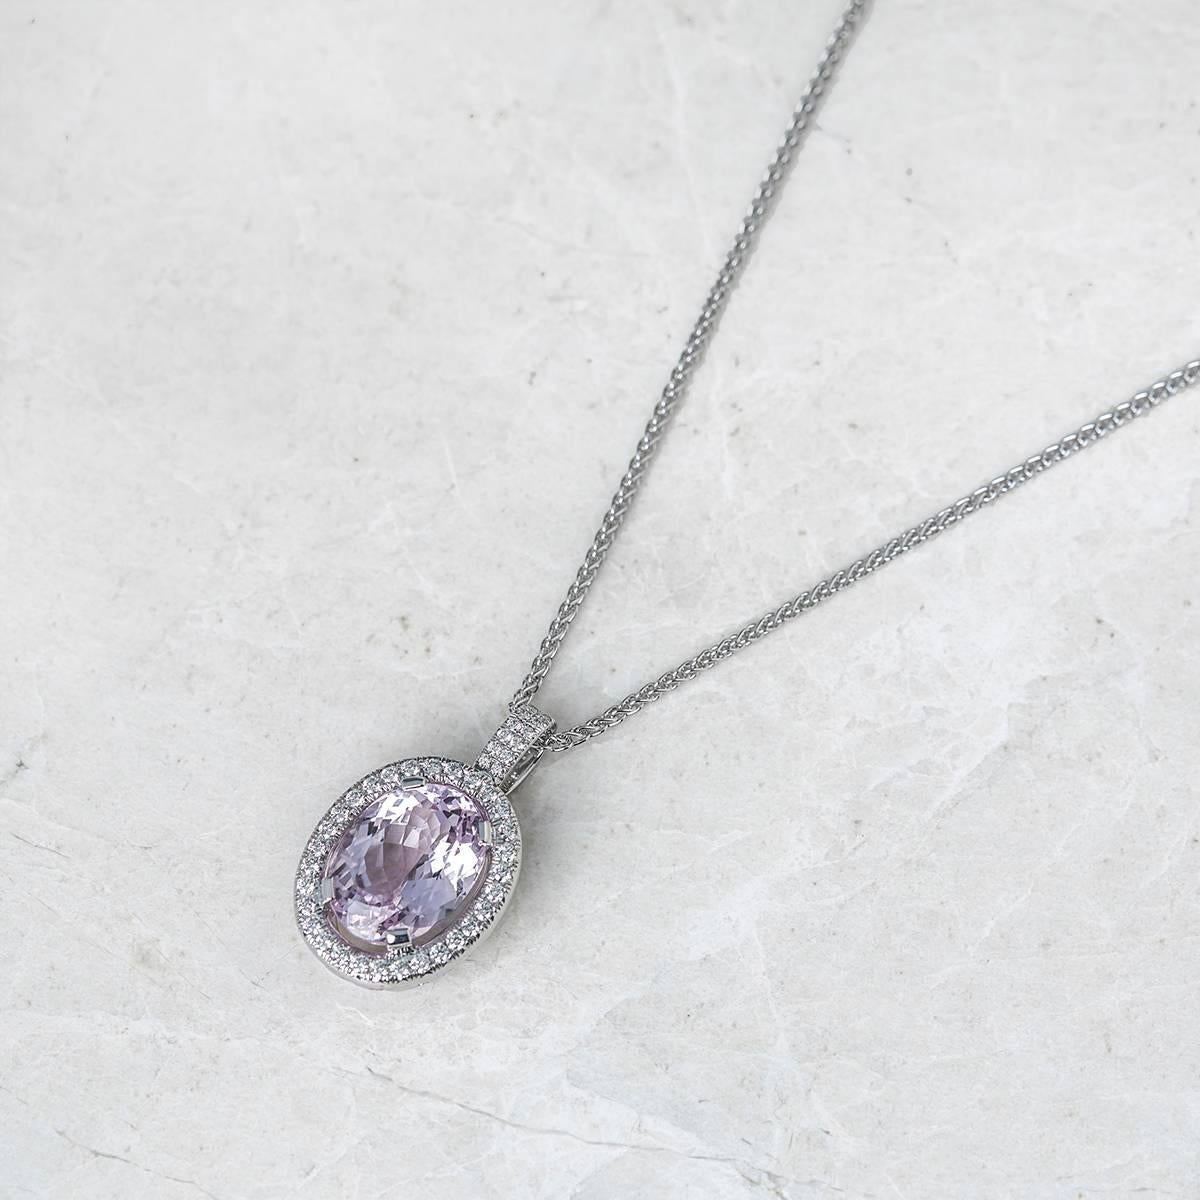 Xupes Code: COM833
Description: 18k White Gold Kunzite & Diamond Necklace
Accompanied With: Xupes Presentation Box
Gender: Ladies
Pendant Length: 3.2cm
Pendant Width: 2cm
Clasp Type: Lobster
Condition: 9
Material: White Gold
Total Weight: